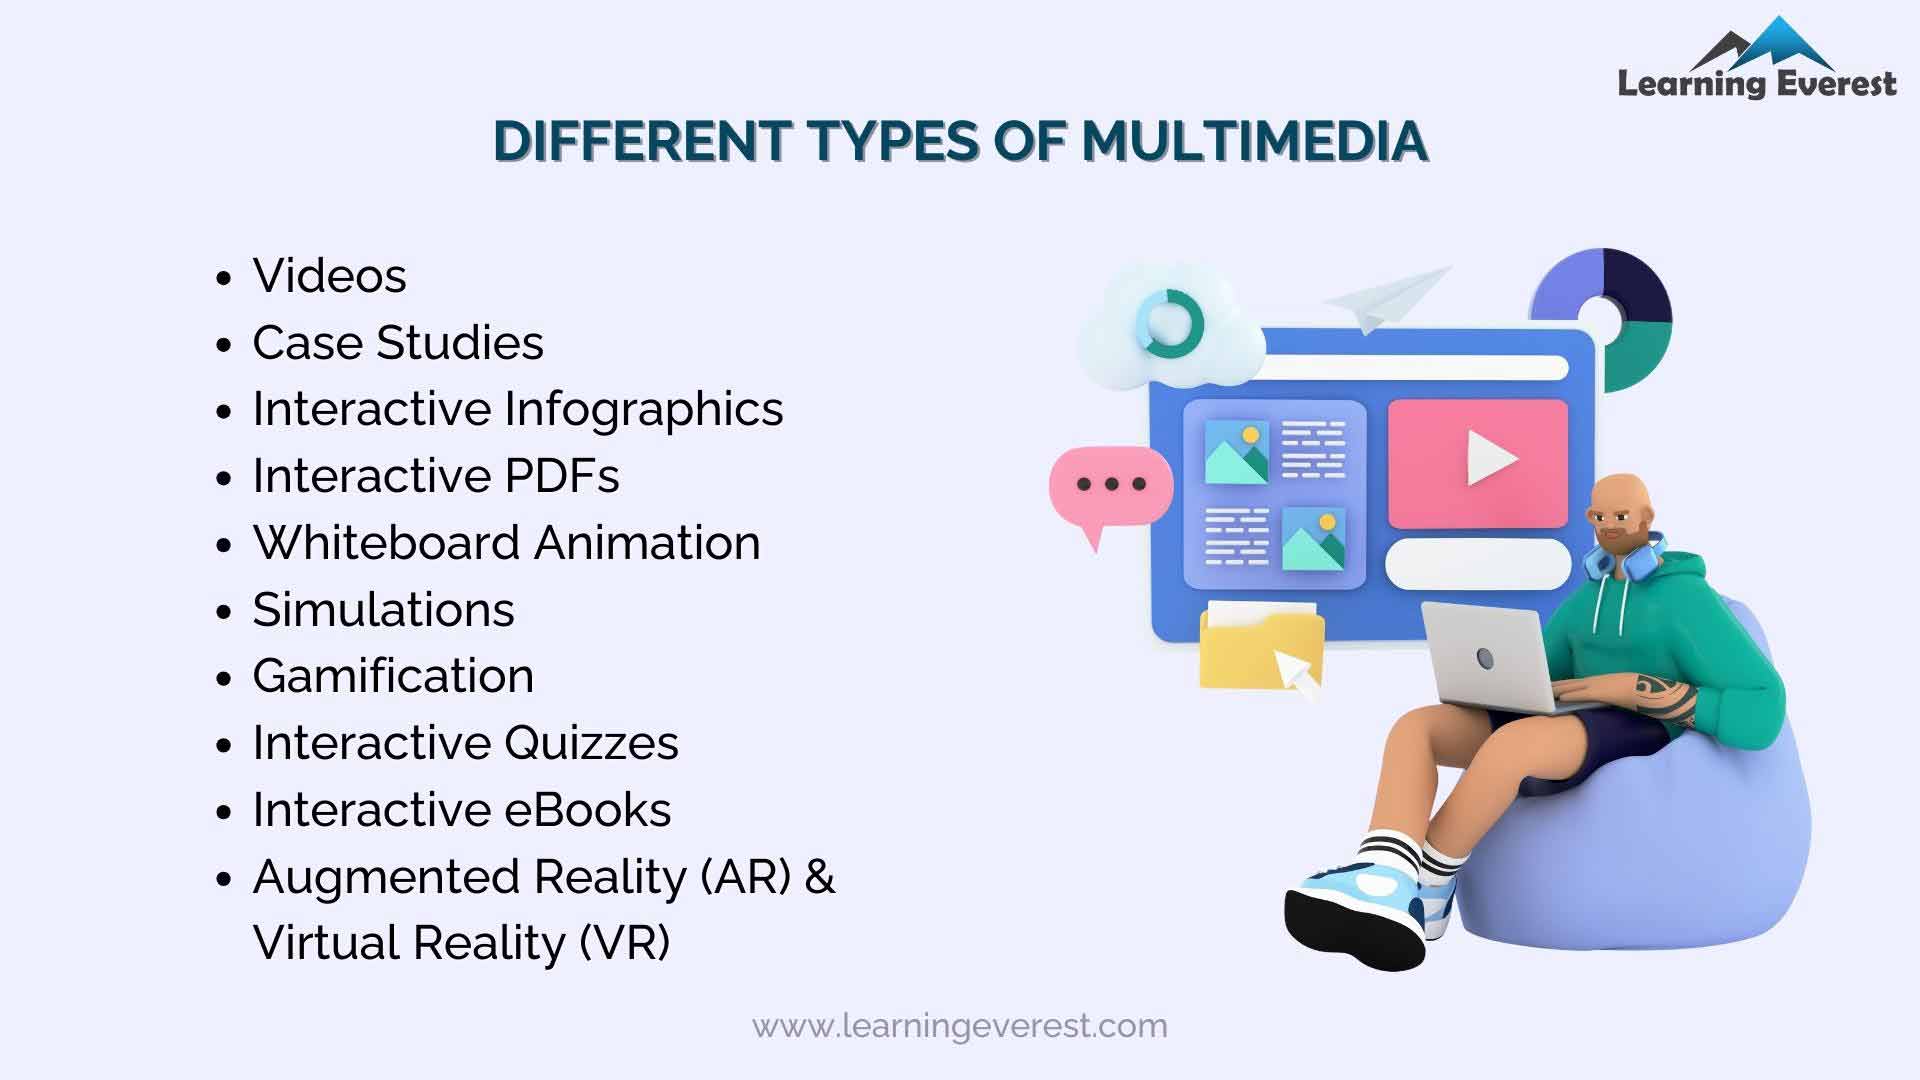 Requirements for eLearning - Engaging Multimedia Content